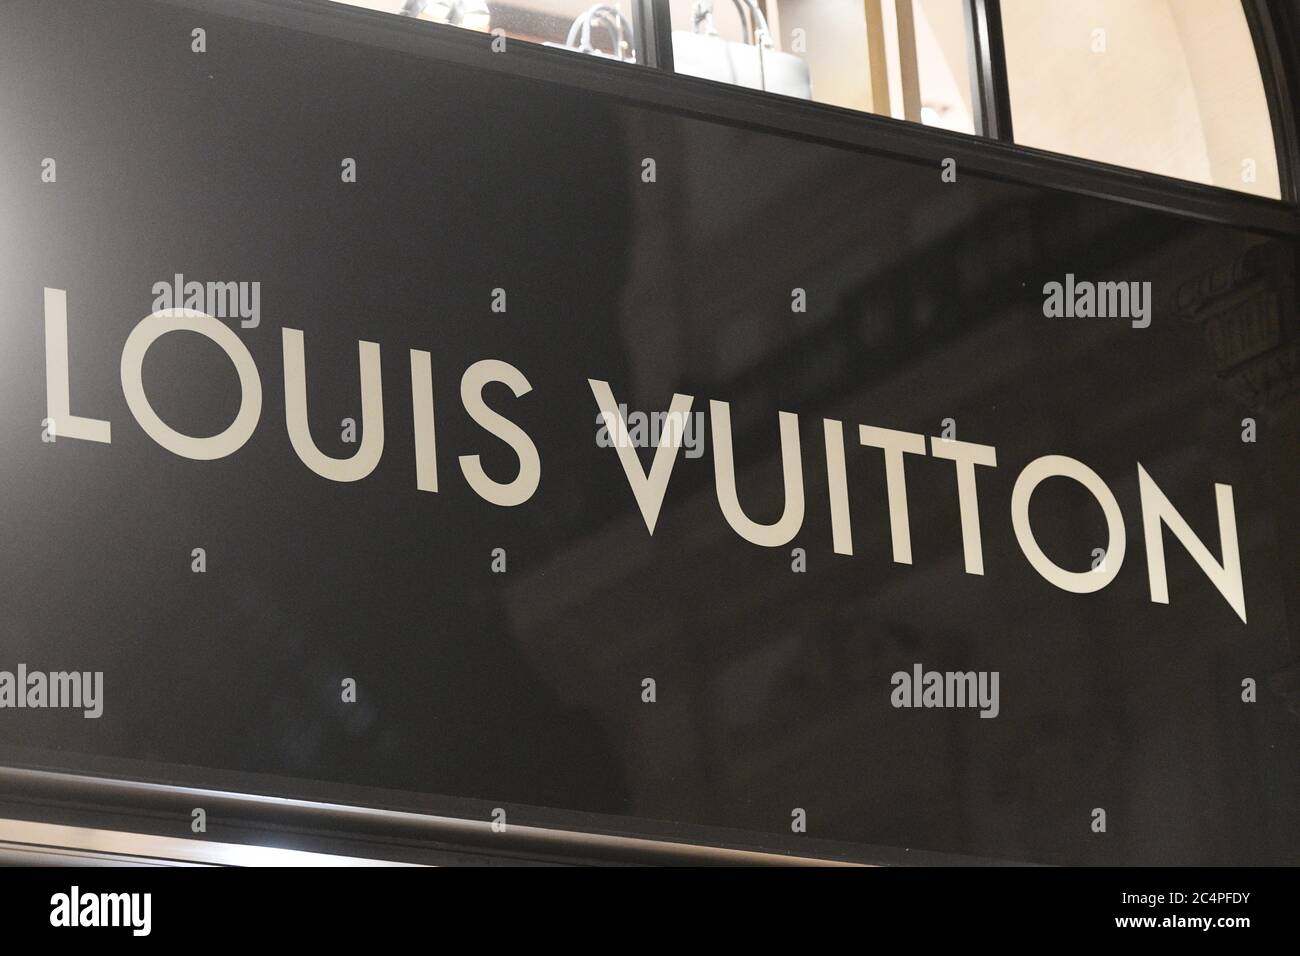 The logo of Louis Vuitton Malletier is seen in Shibuya Ward, Tokyo on  January 19, 2020. Louis Vuitton is a French fashion house and luxury retail  company founded in 1854 by Louis